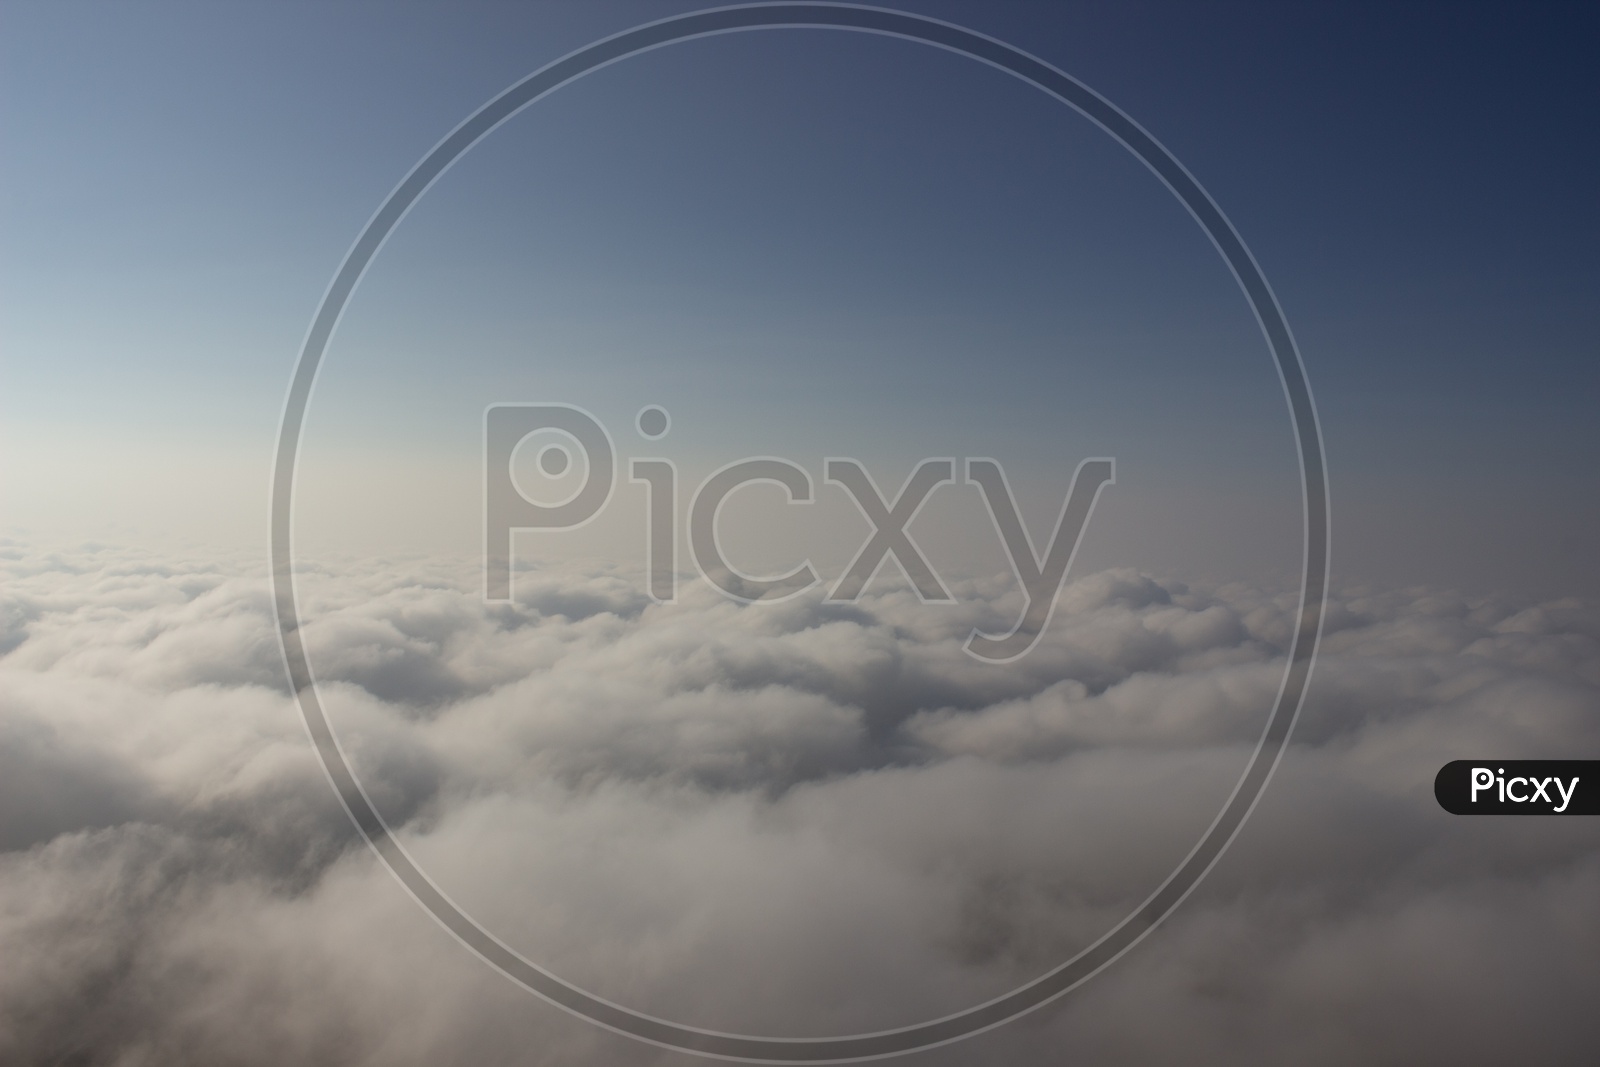 Sky above the Clouds / Landscape of Clouds and Sky